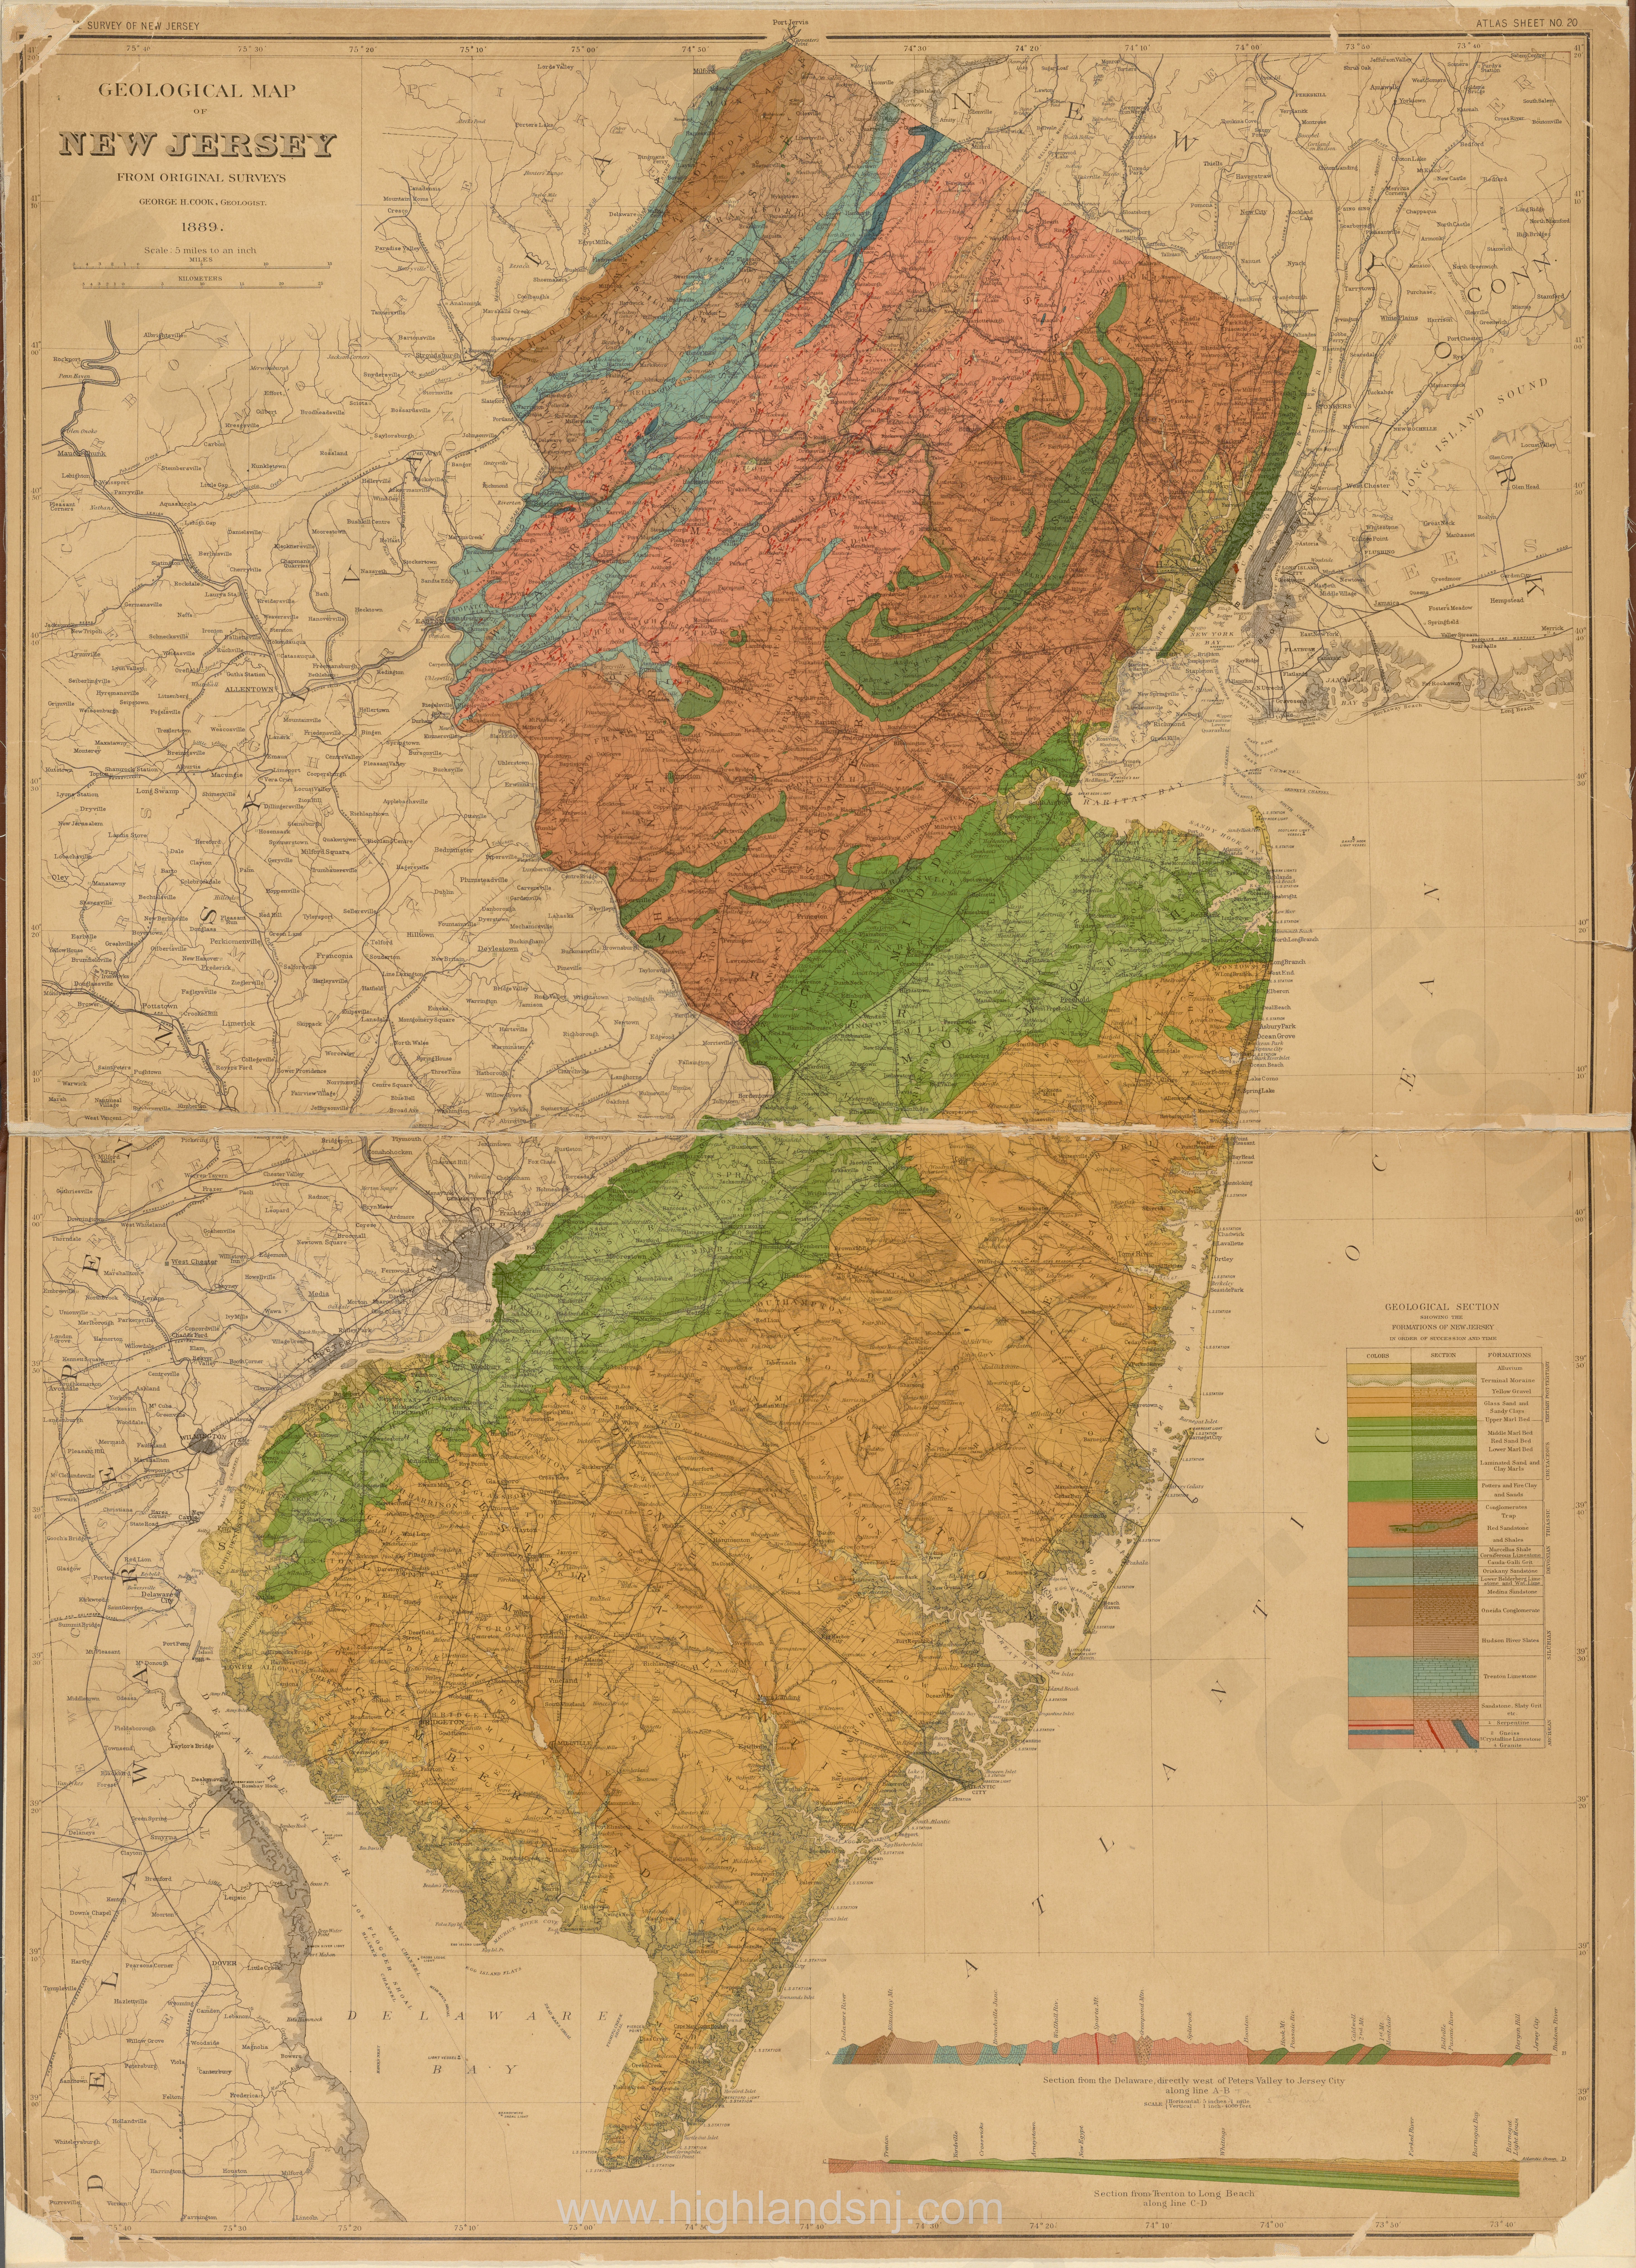 1889 Geological map of New Jersey, Double Page Sheet No. 20